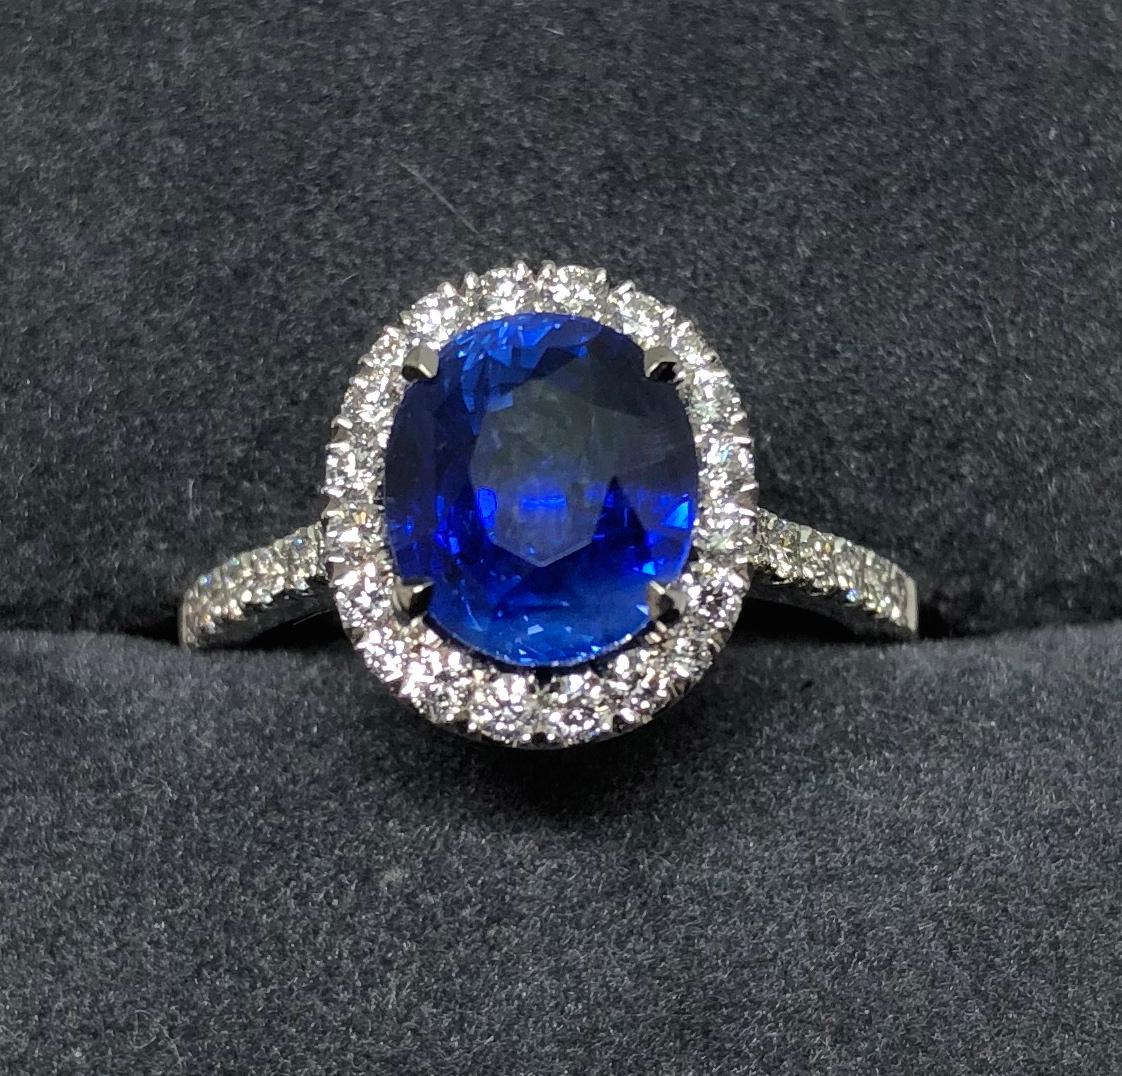 A beautifully set 3.17 carat Oval Sapphire surrounded by a Halo cluster of diamonds with diamond set shoulders. The stones are set in Platinum designed and handmade by E & W Hopkins Ltd. The ring size is US 5 1/2.
